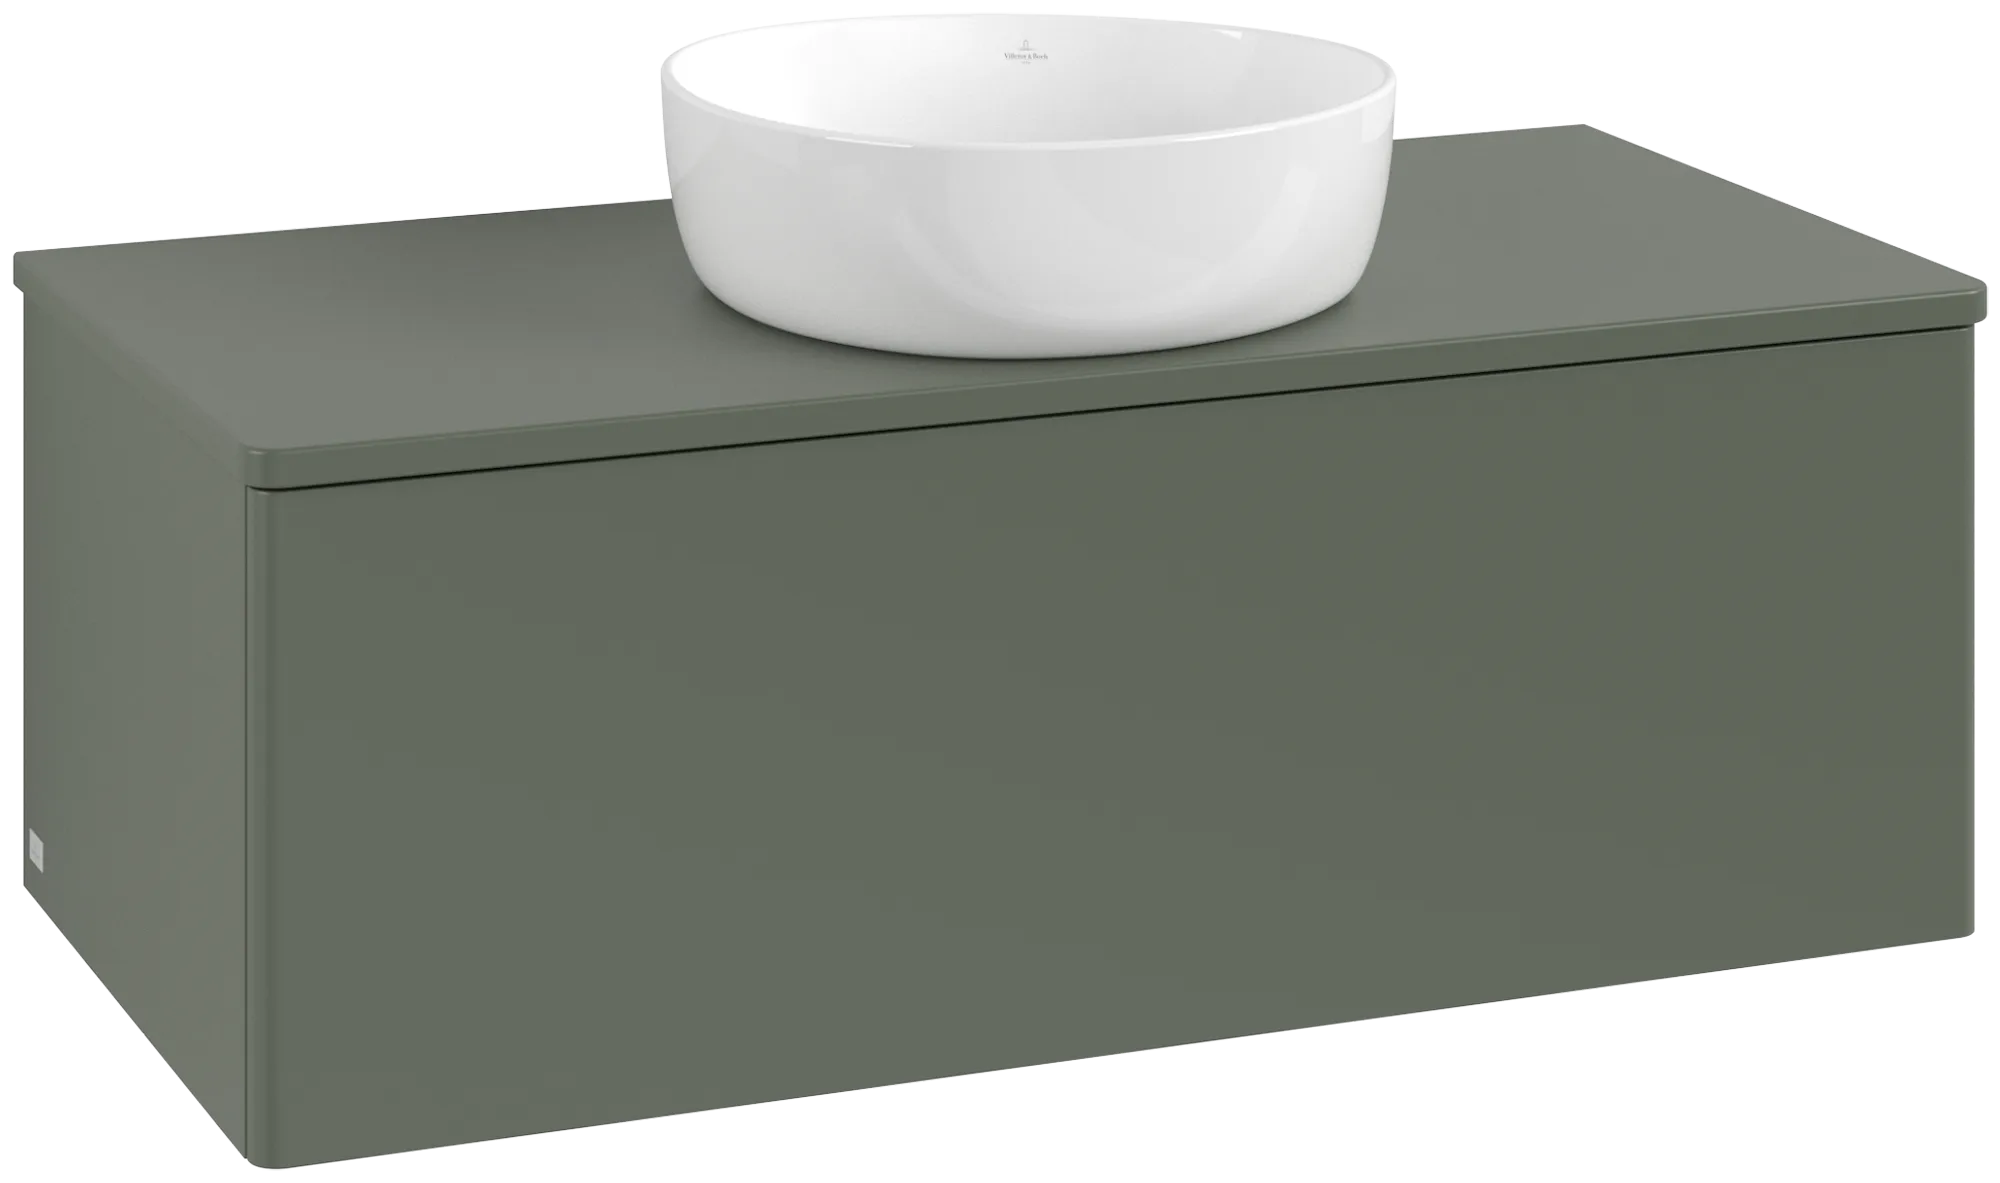 Obrázek VILLEROY BOCH Antao Vanity unit, 1 pull-out compartment, 1000 x 360 x 500 mm, Front without structure, Leaf Green Matt Lacquer / Leaf Green Matt Lacquer #K31050HL